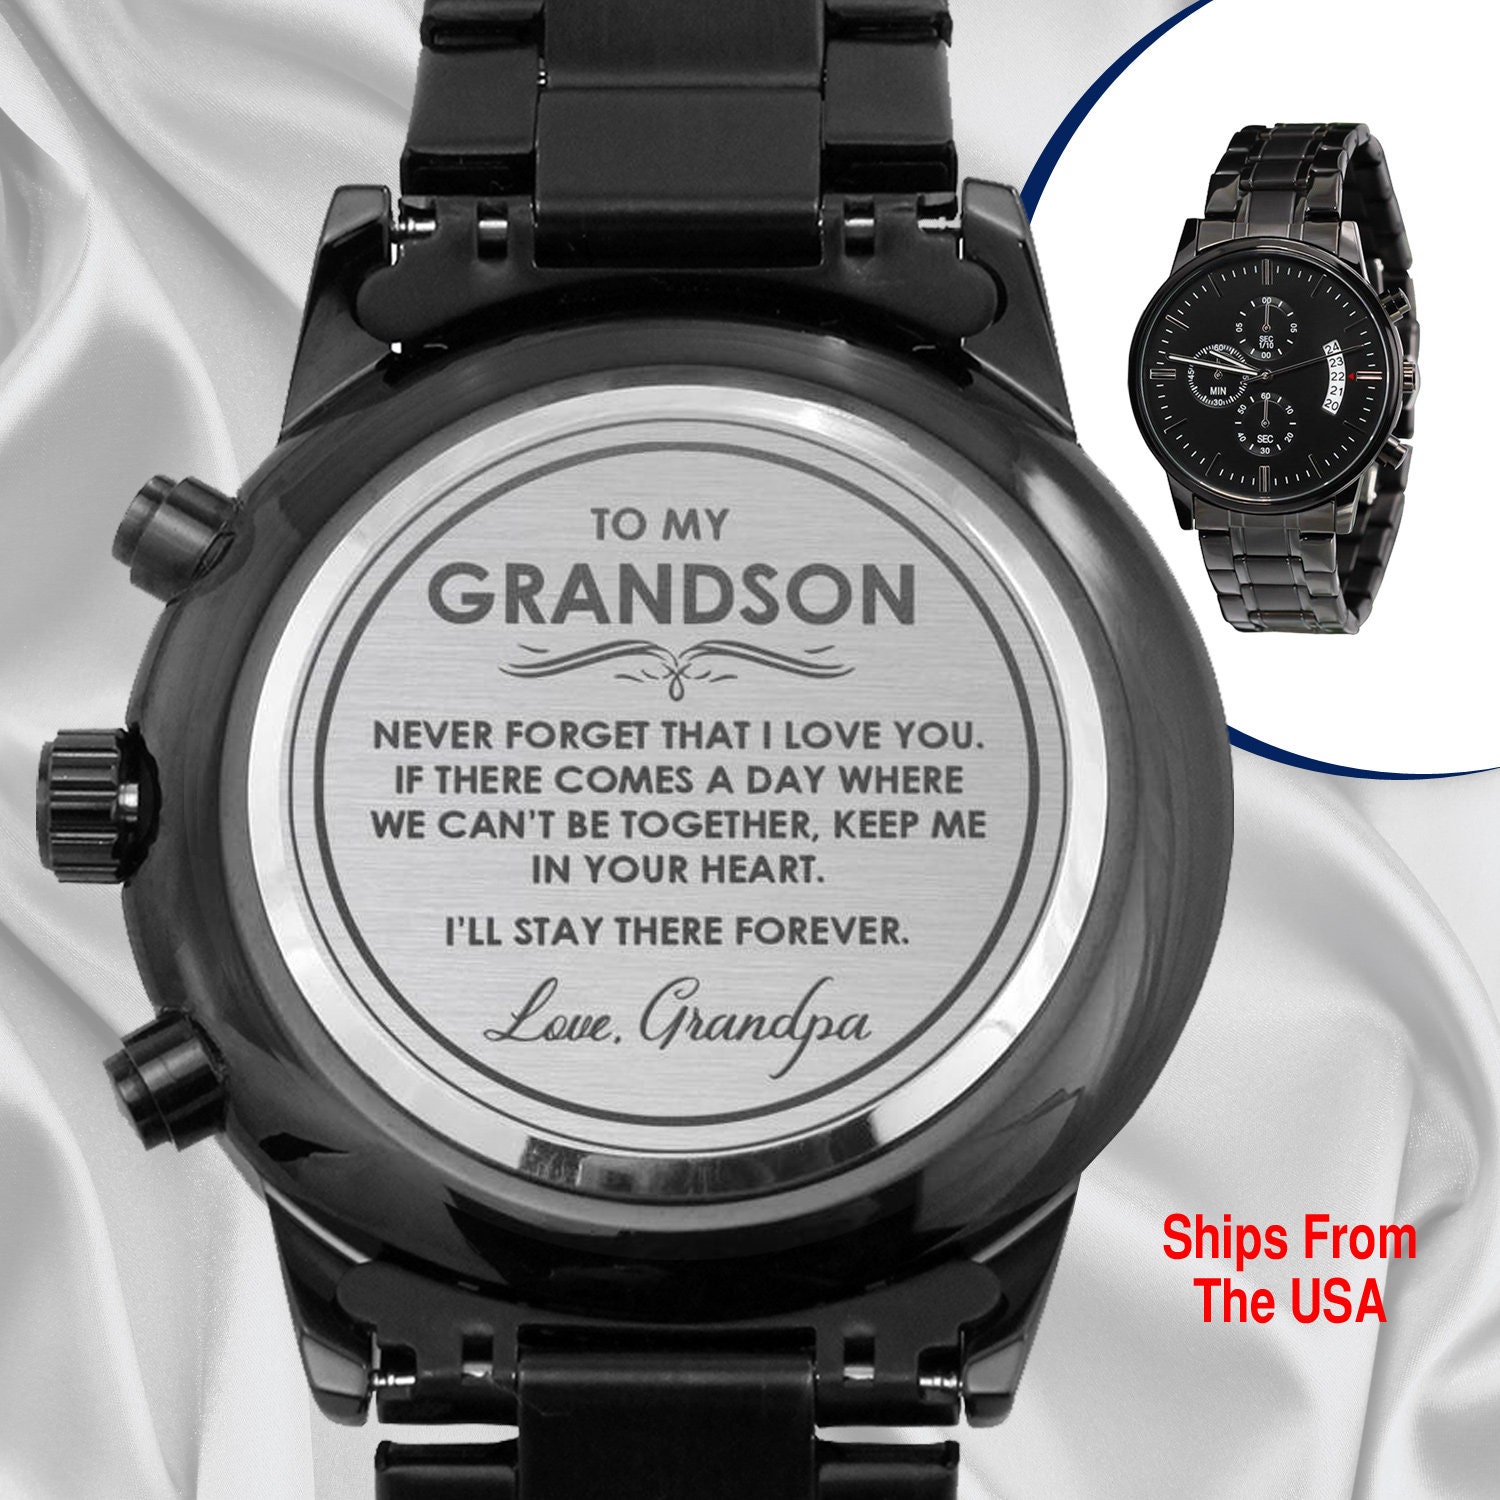 fcity.in - Grandson Sports Watch And Led Watch / Colorful Men Sports Watches